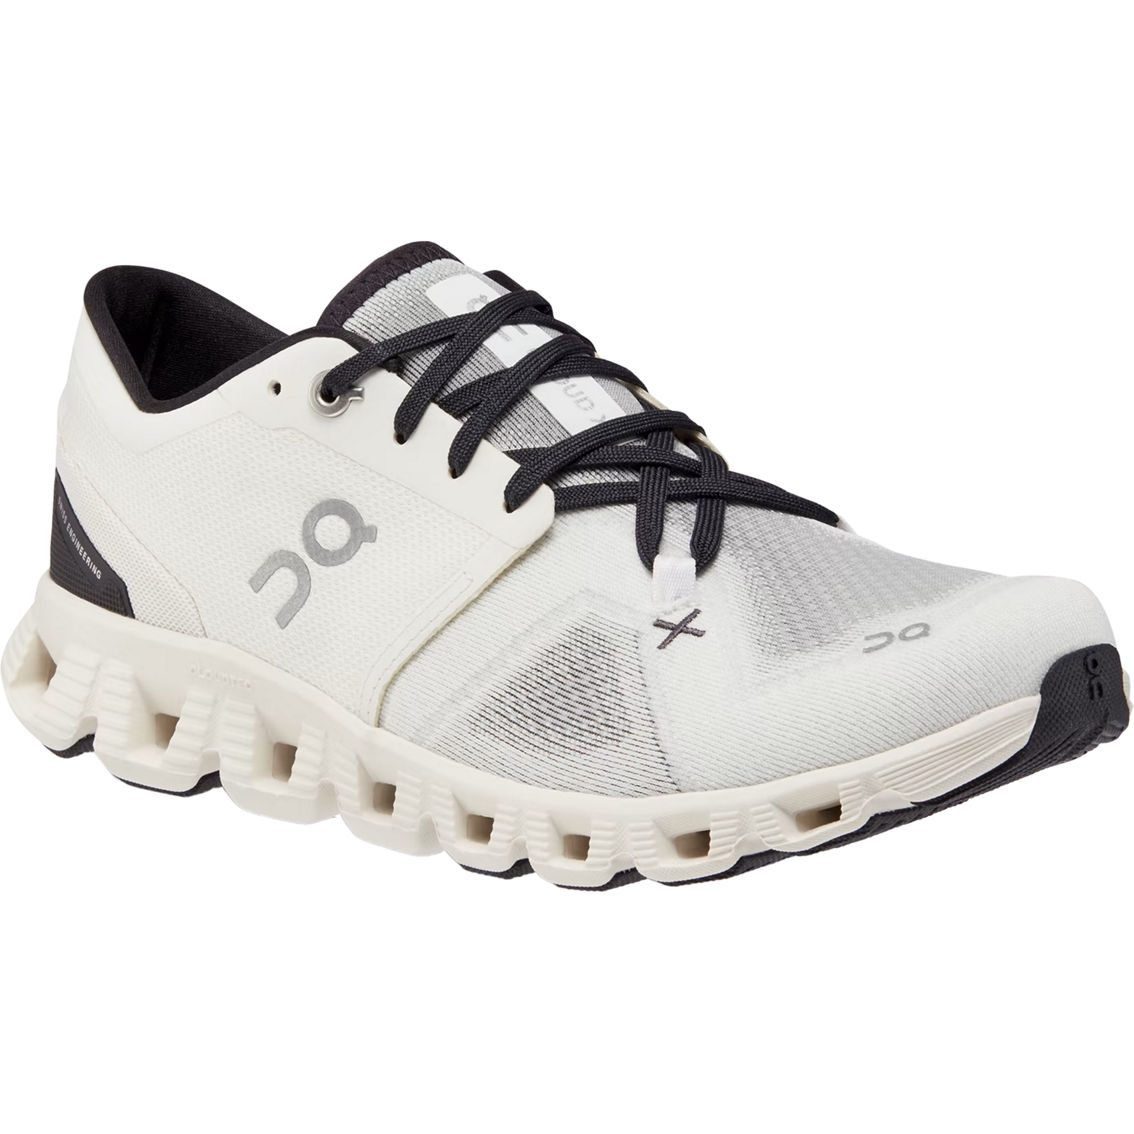 On Women's Cloud X 3 Running Shoes | Women's Athletic Shoes | Shoes ...